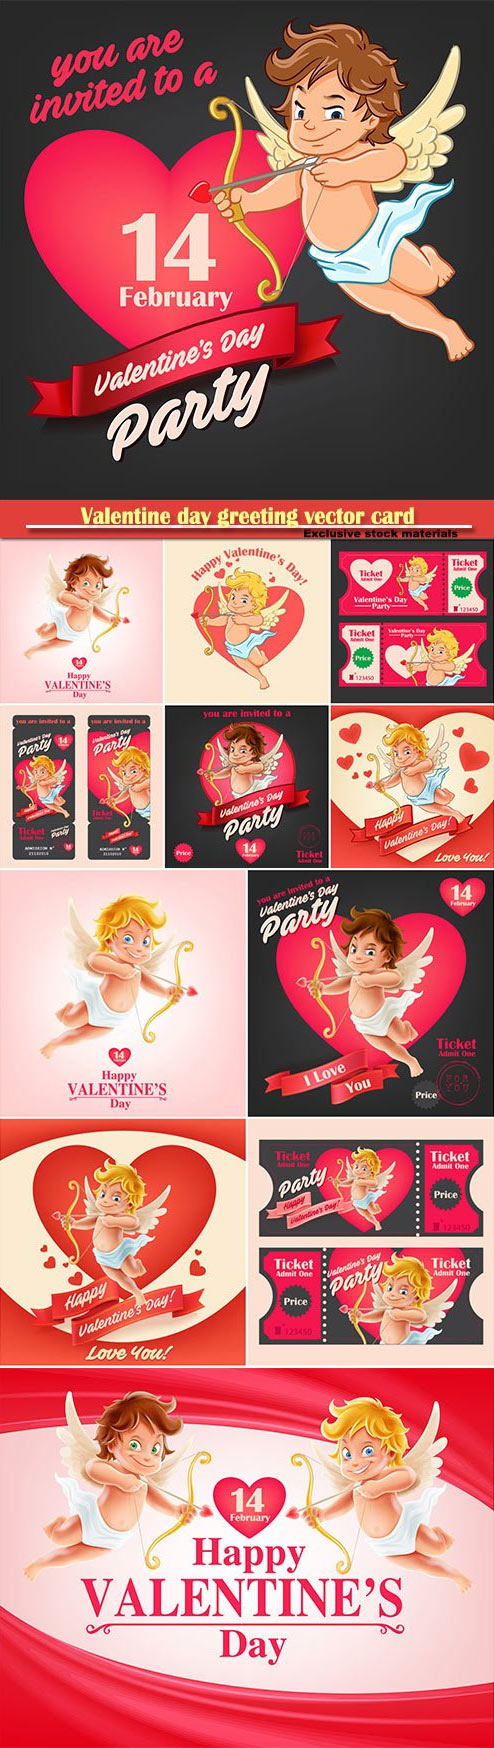 Valentine Day Greeting Vector Card Vol 5